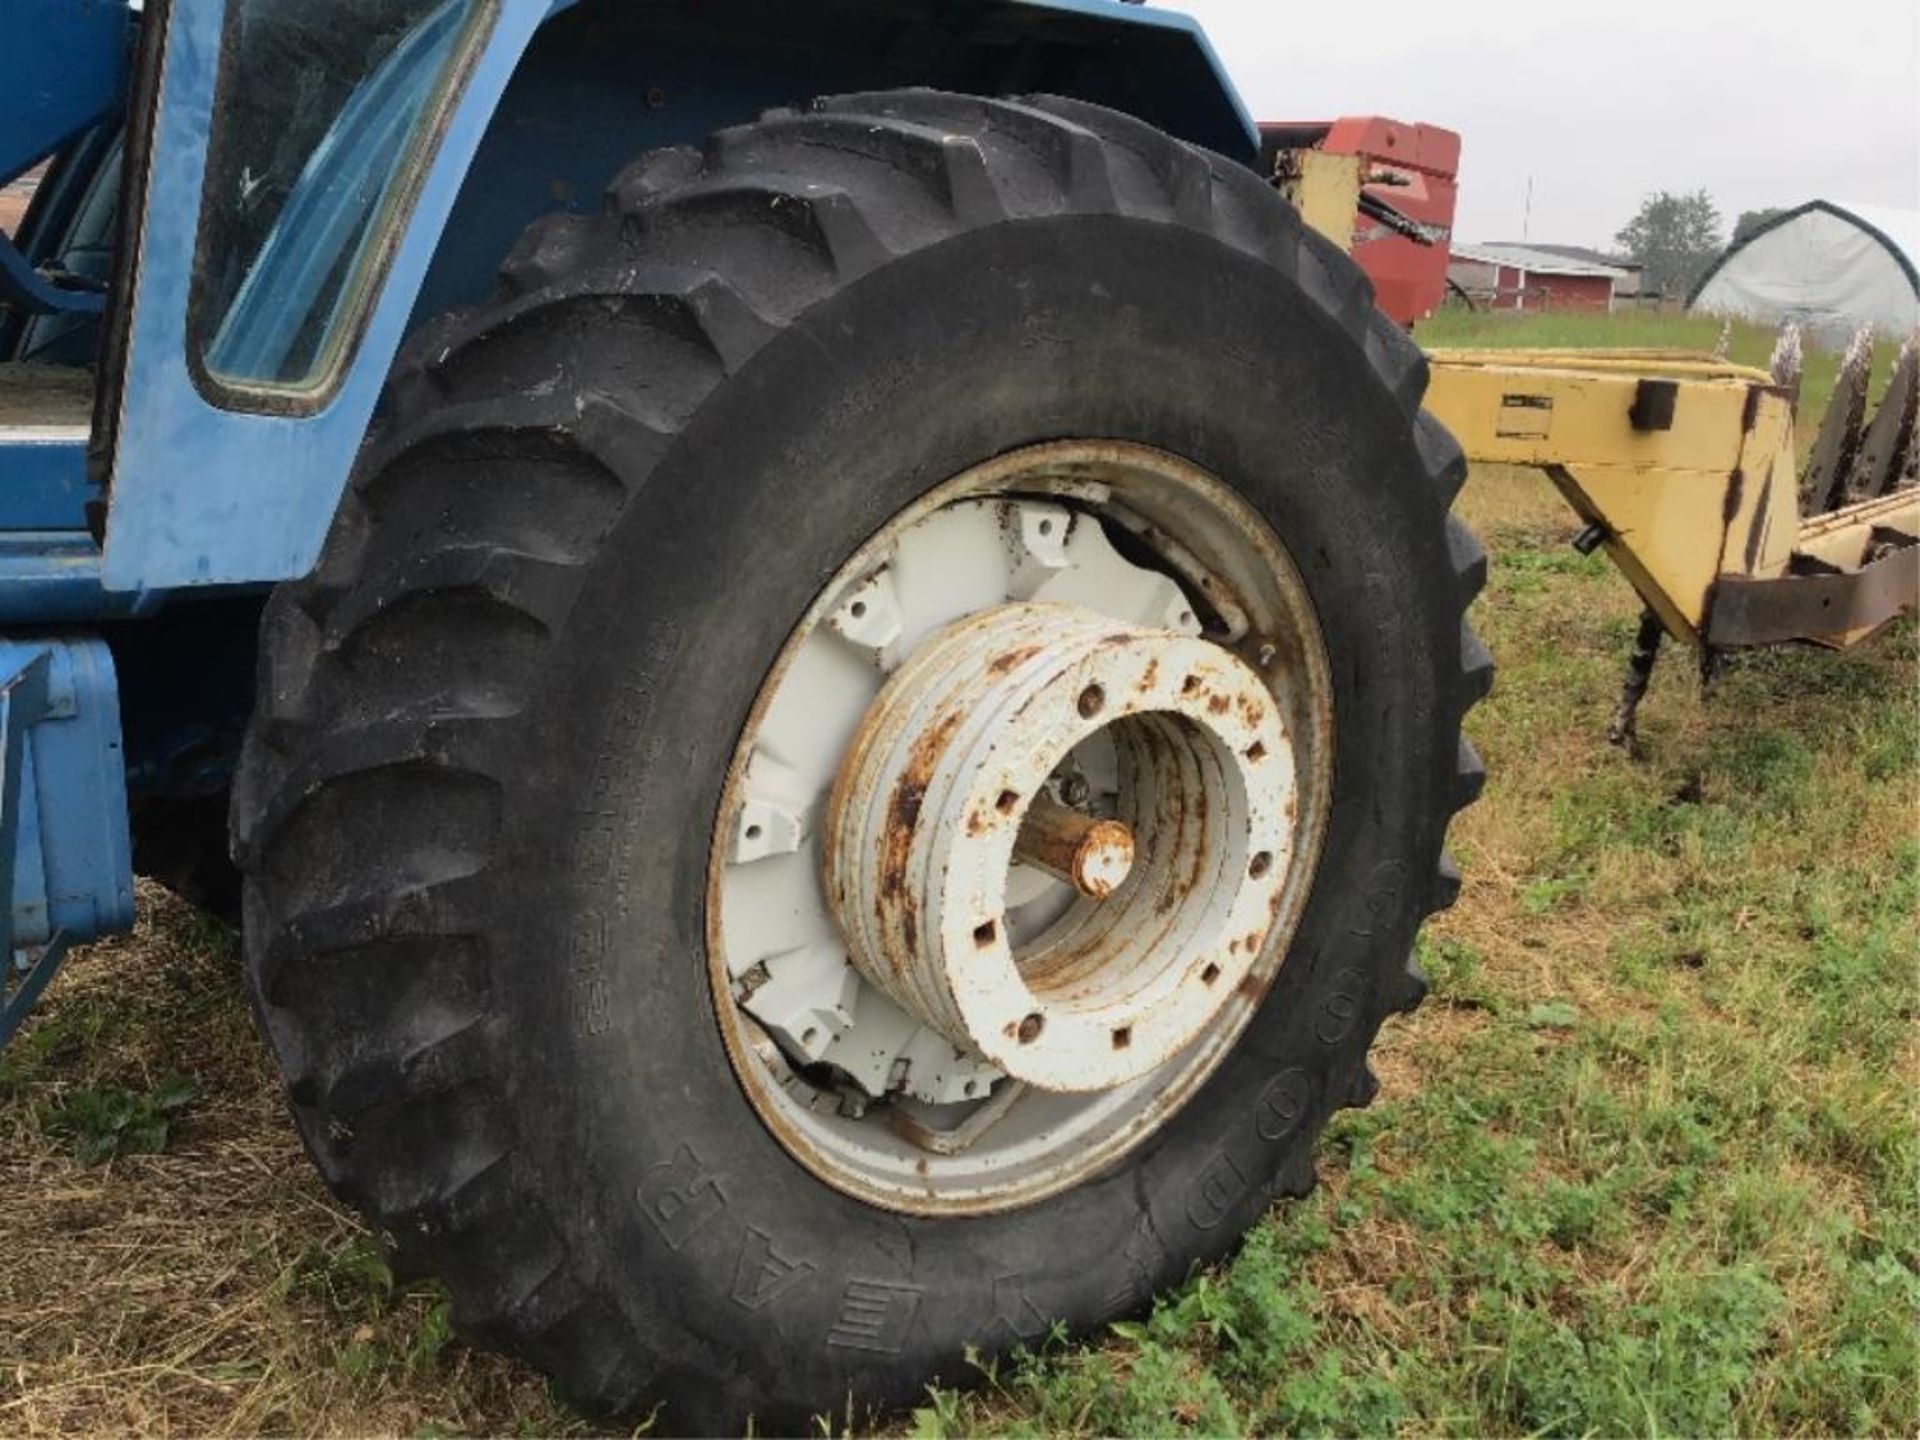 1983 Ford TW-35 MFWD Tractor Rear Wheel Weights, 190hp, 20.8R38 rr, 14.9-28fr, 3 hyd, 1000PTO, 5011h - Image 4 of 16